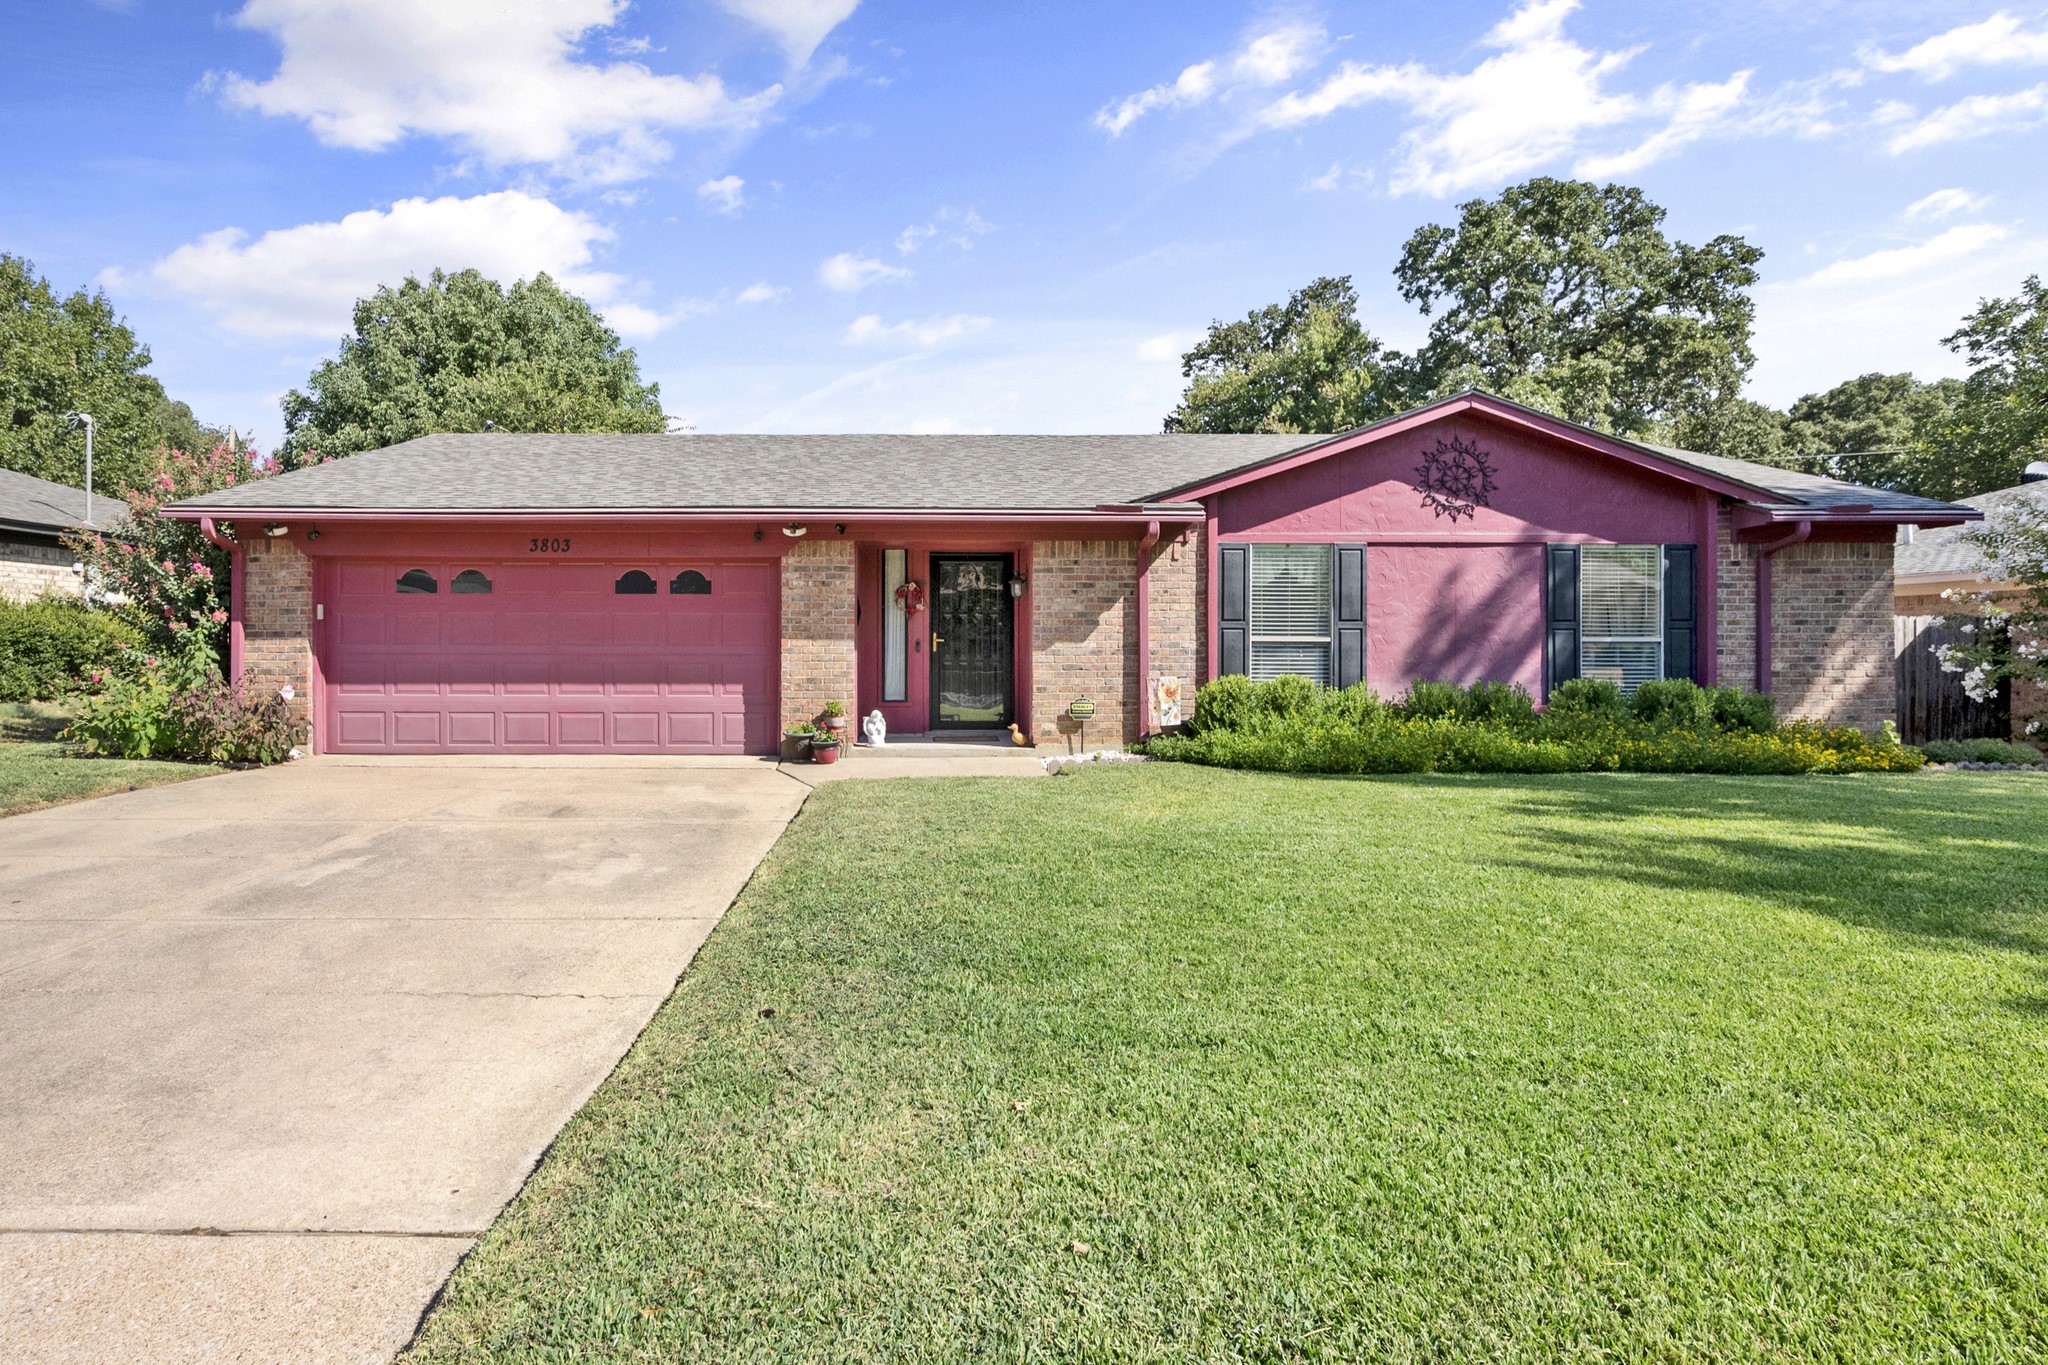 3803 Mahonia Court Arlington, Mansfield, and surrounding areas. Home Listings - Front Real Estate Company Real Estate, Sell Home, Buy Home, Property Analysis, Home Ownership